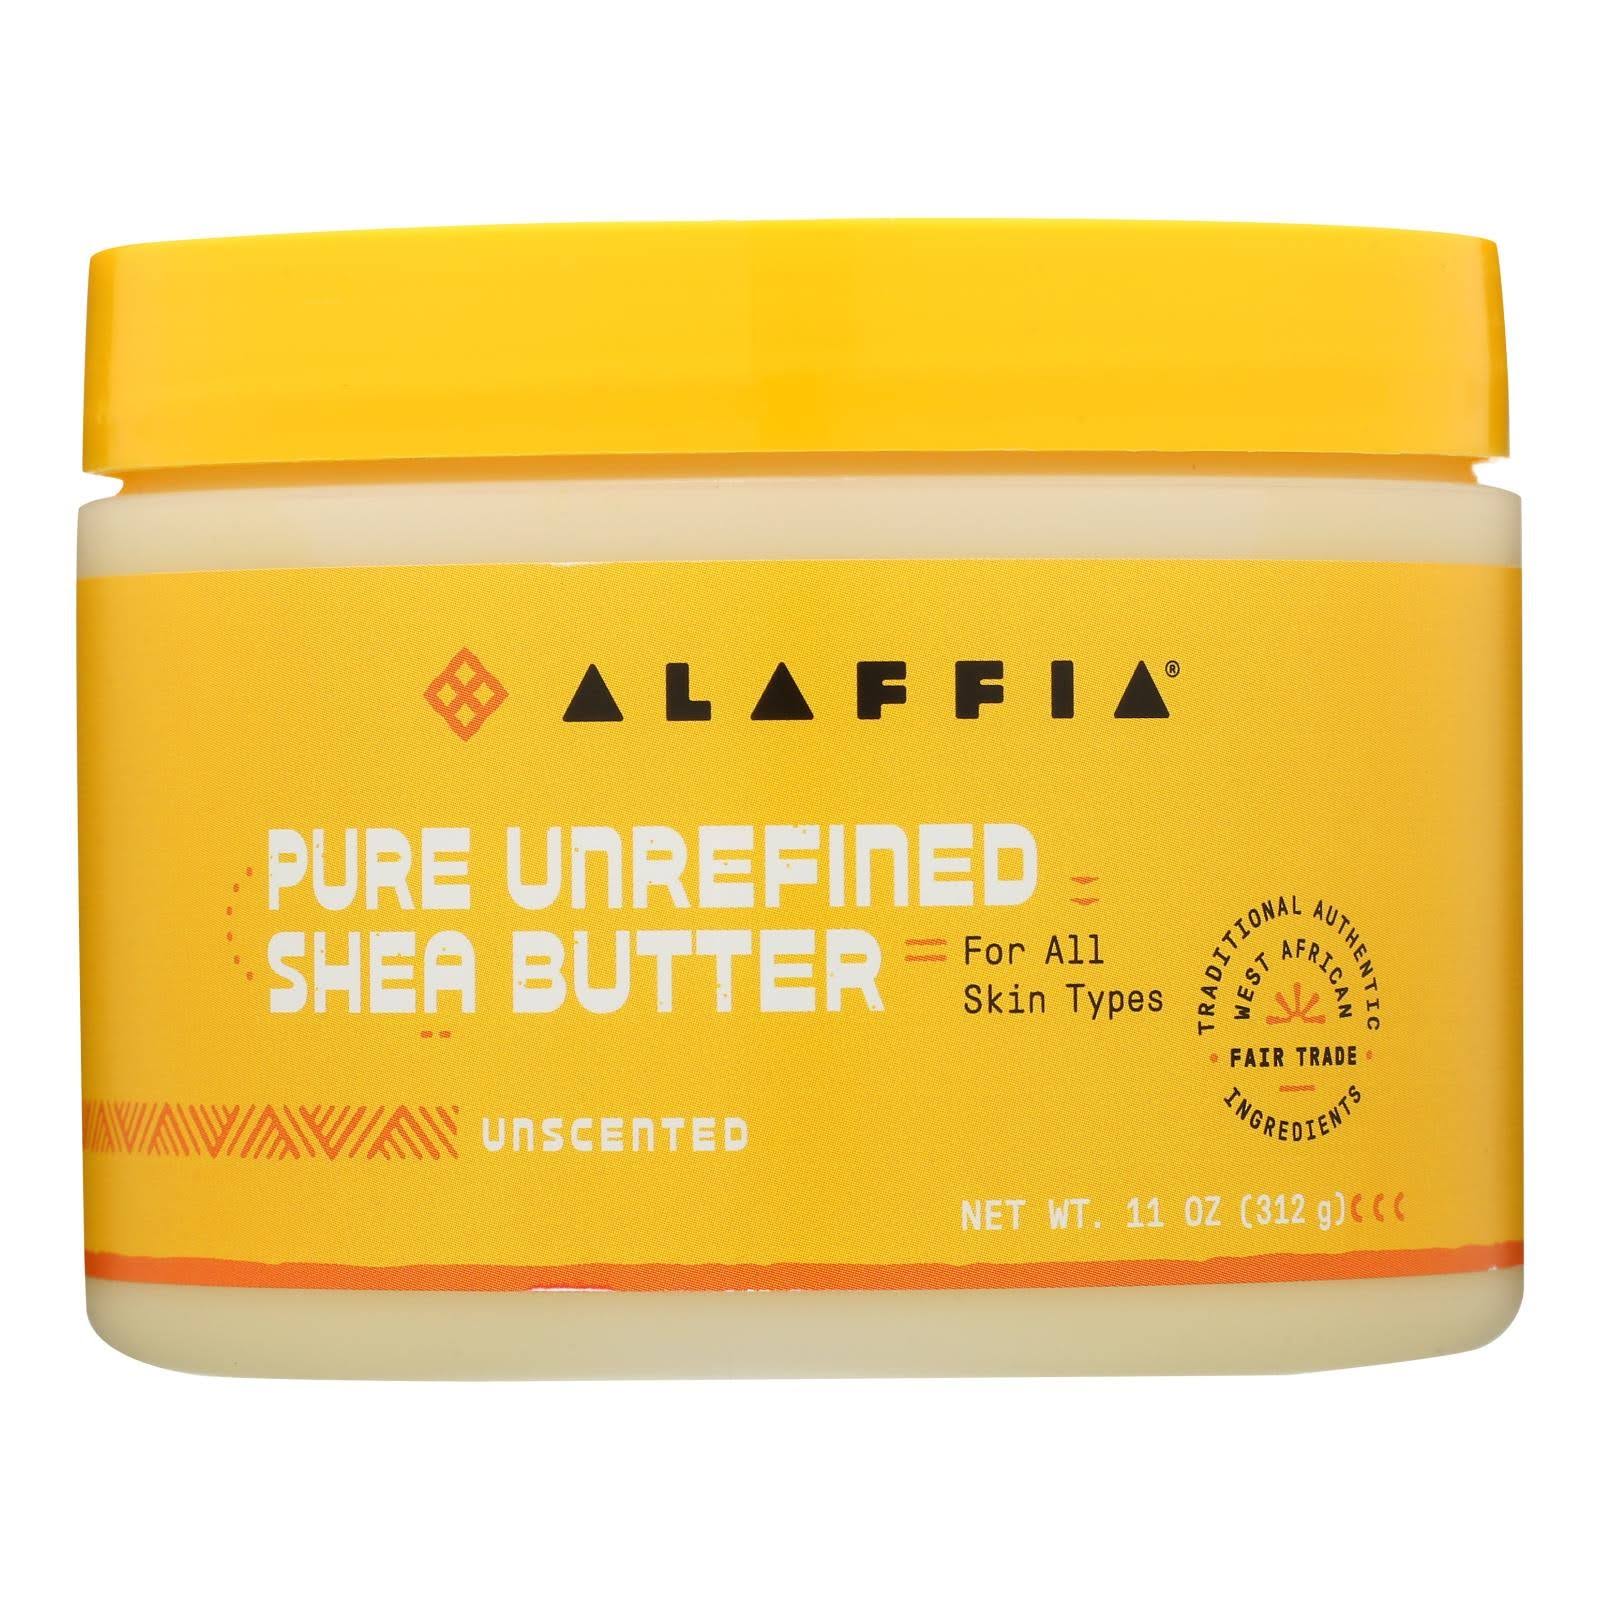 Everyday Shea Shea Butter - Unscented, 312g